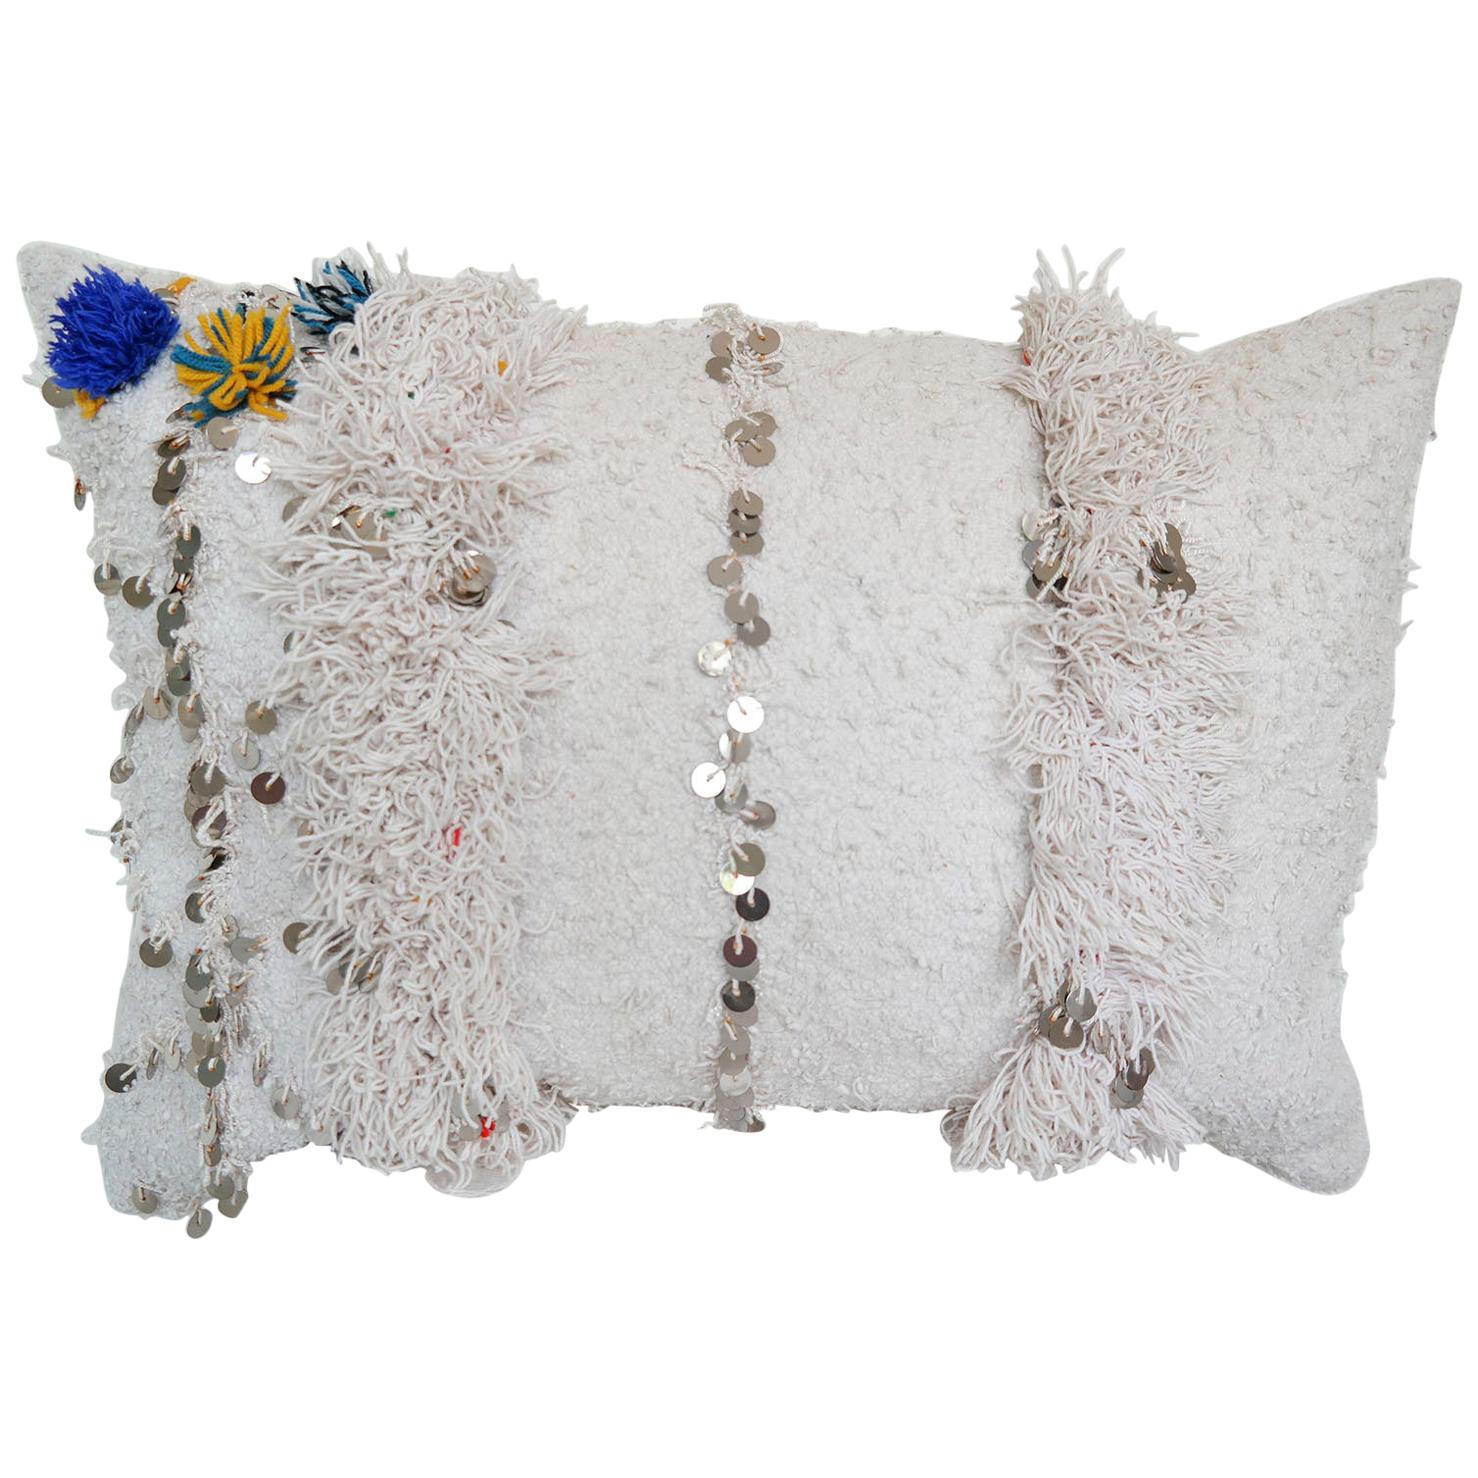 Moroccan Pillow Made from a Vintage Wedding Blanket, Berber Handira with Sequins For Sale